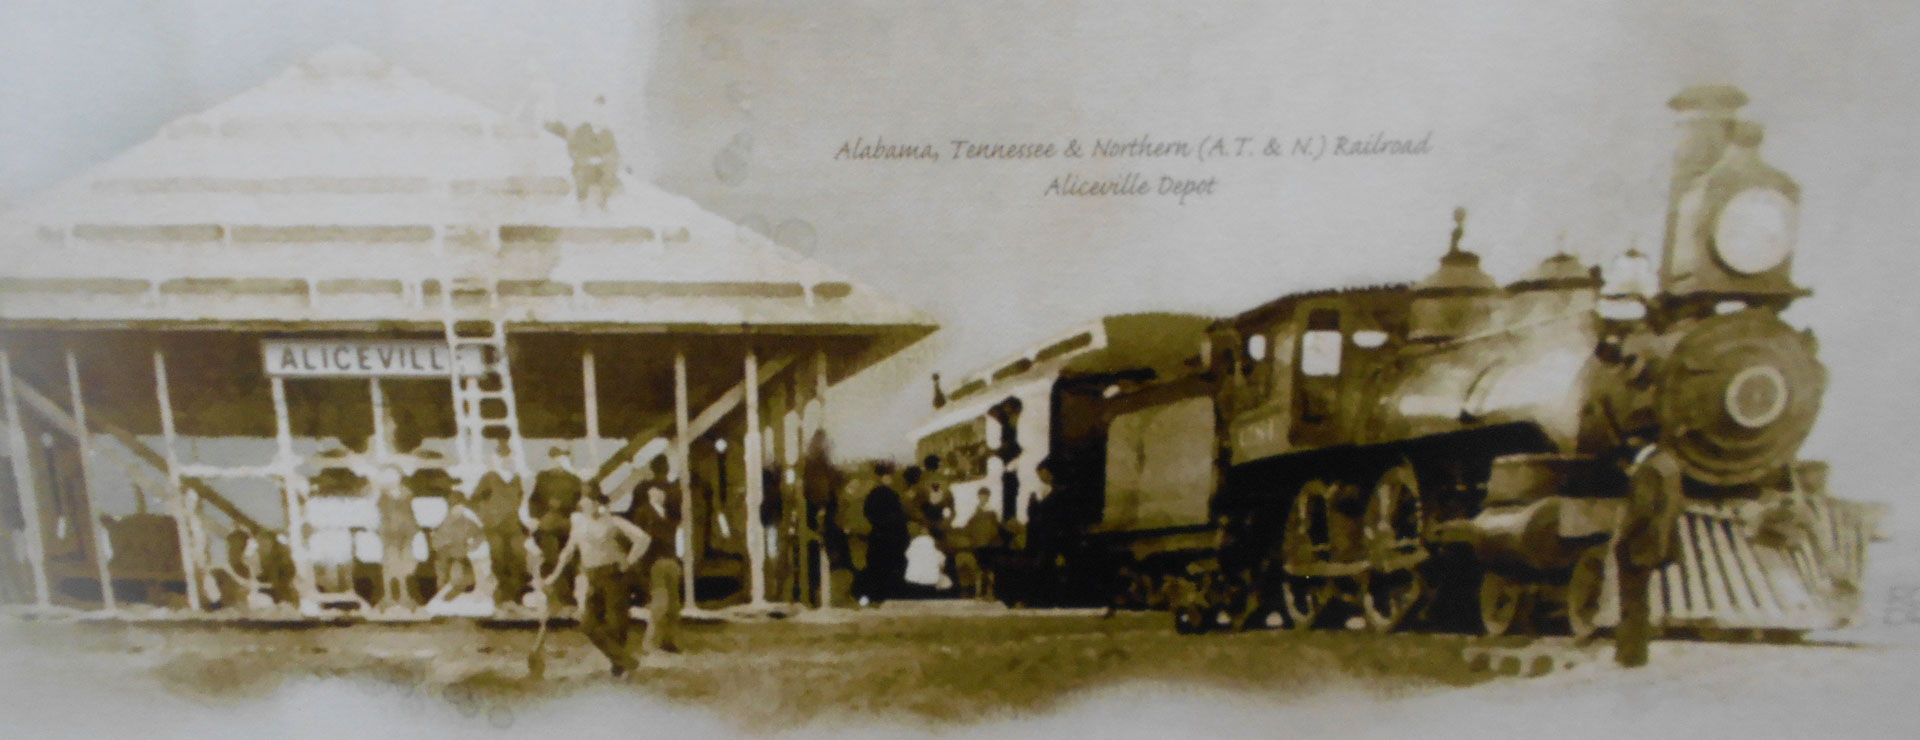 AT&N (Alabama, Tennessee and Northern) railroad depot 